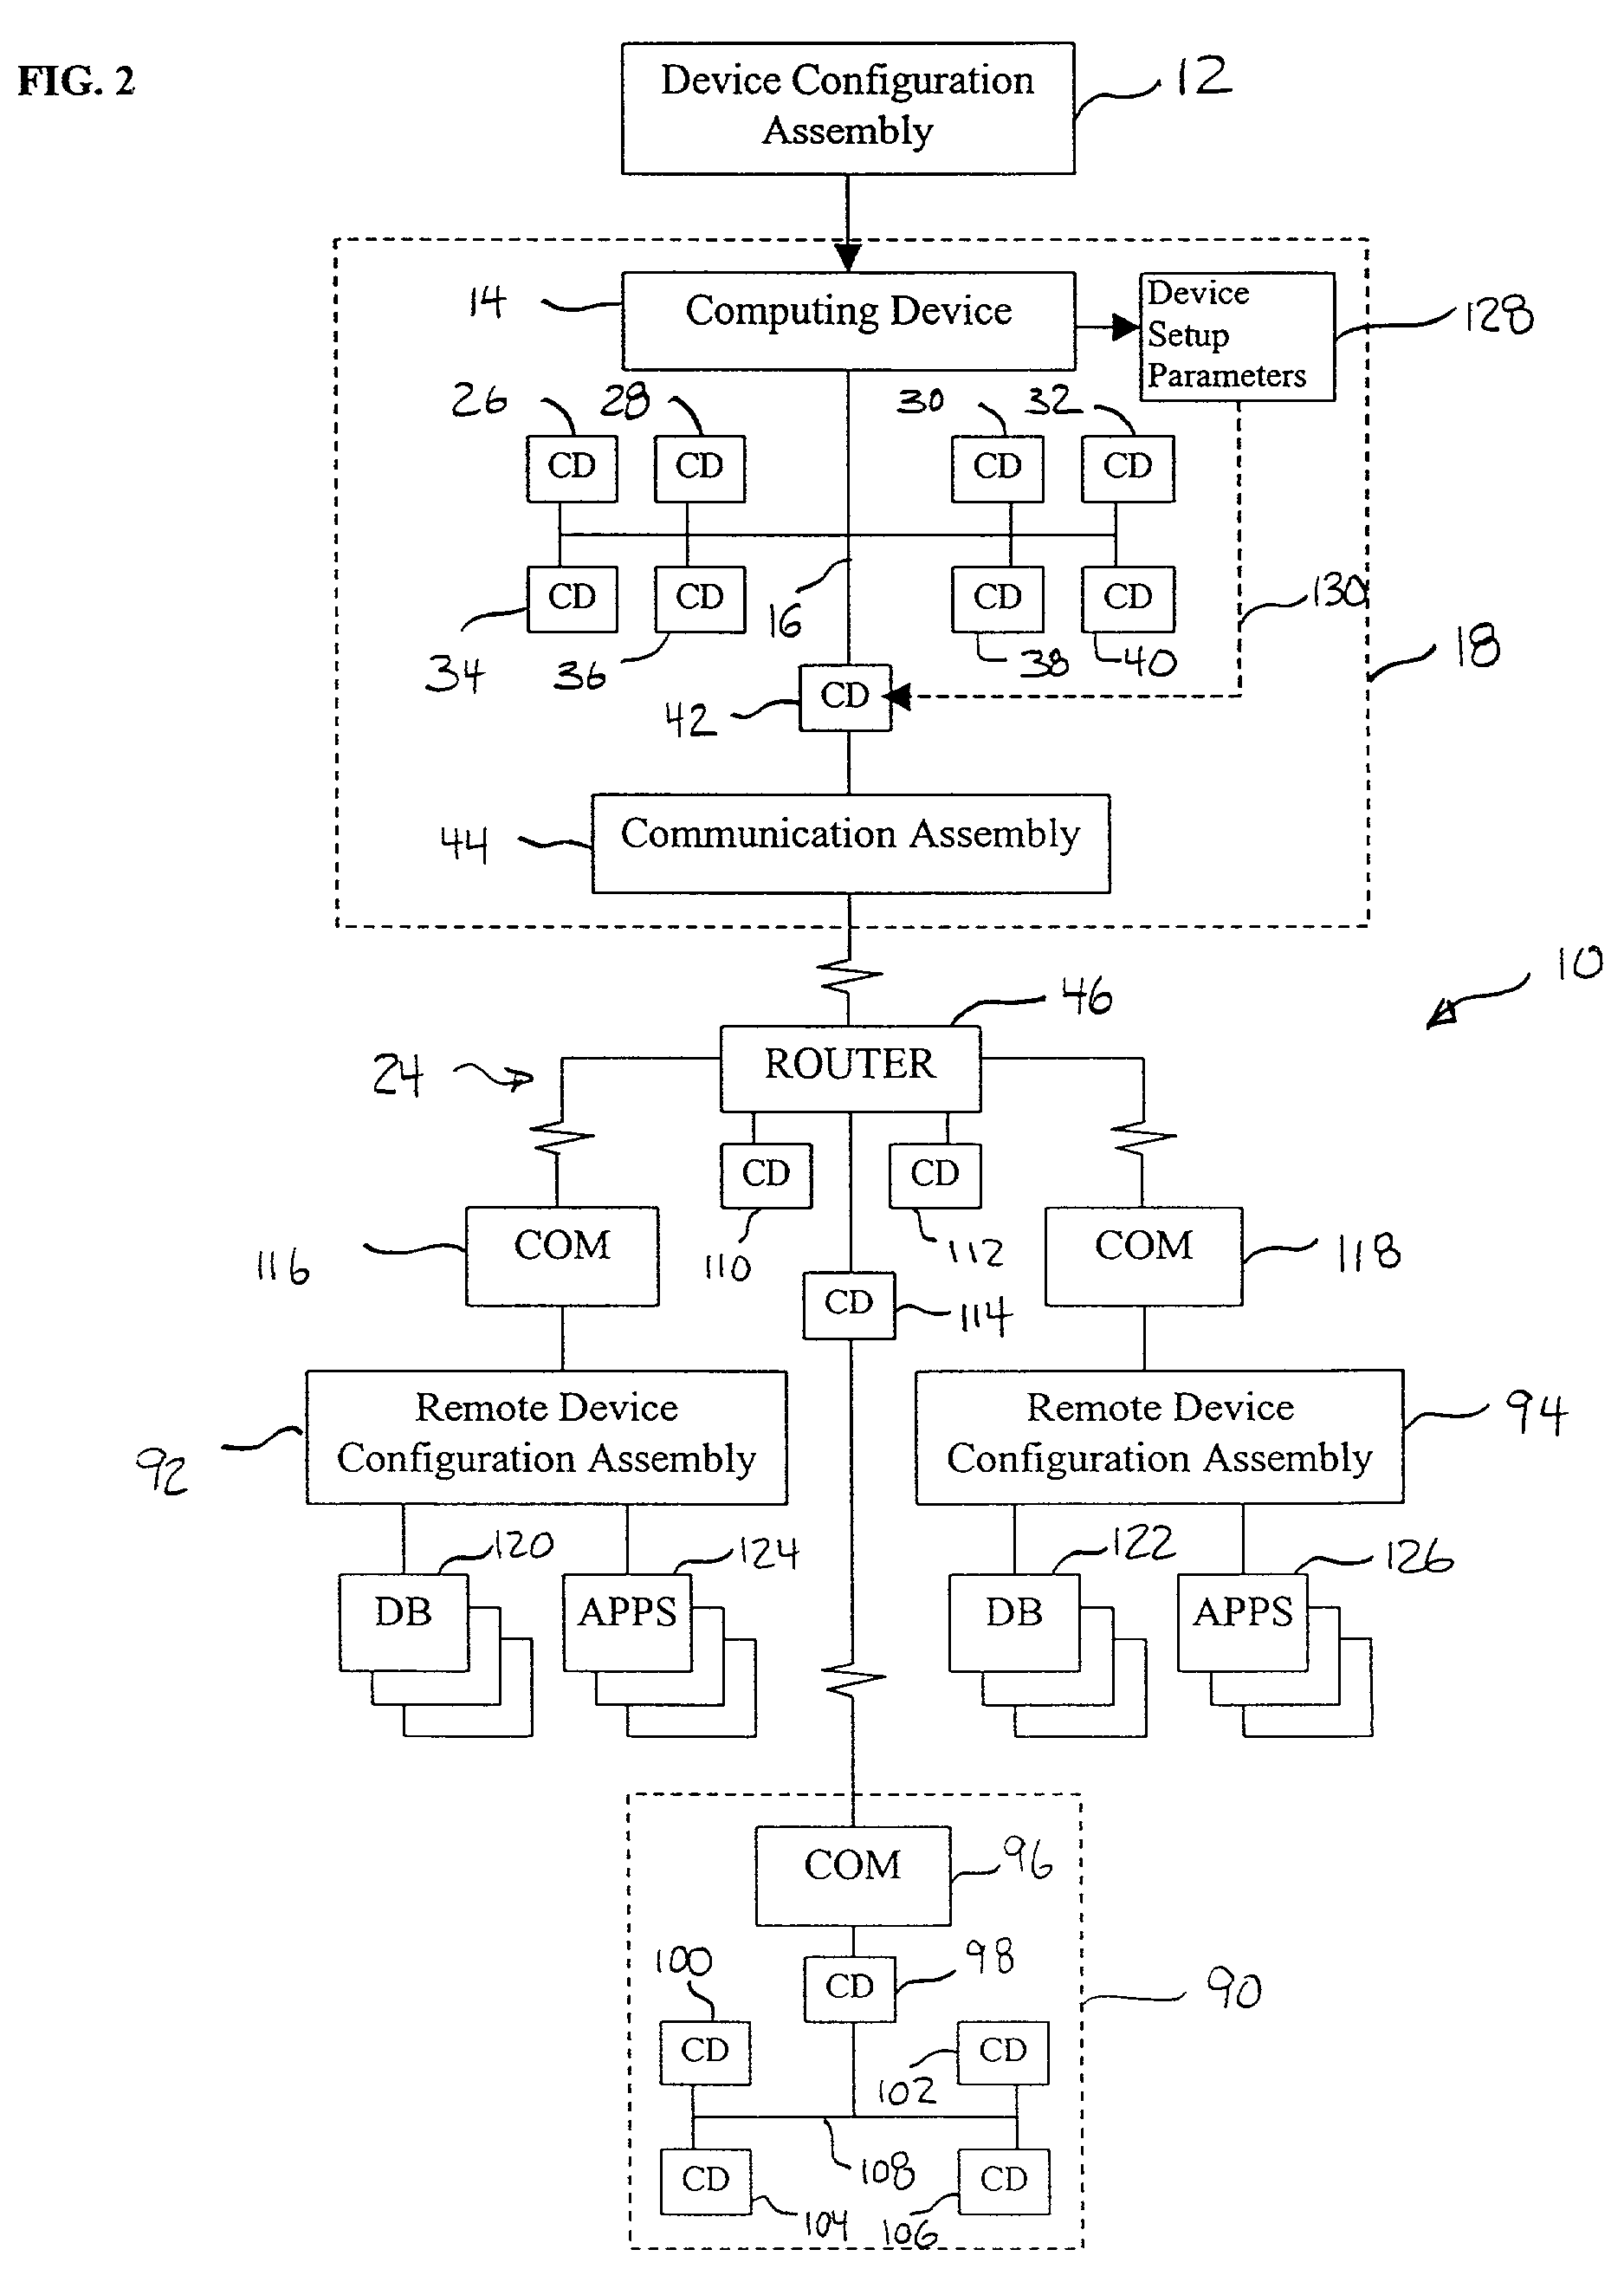 System and method for remote discovery and configuration of a network device